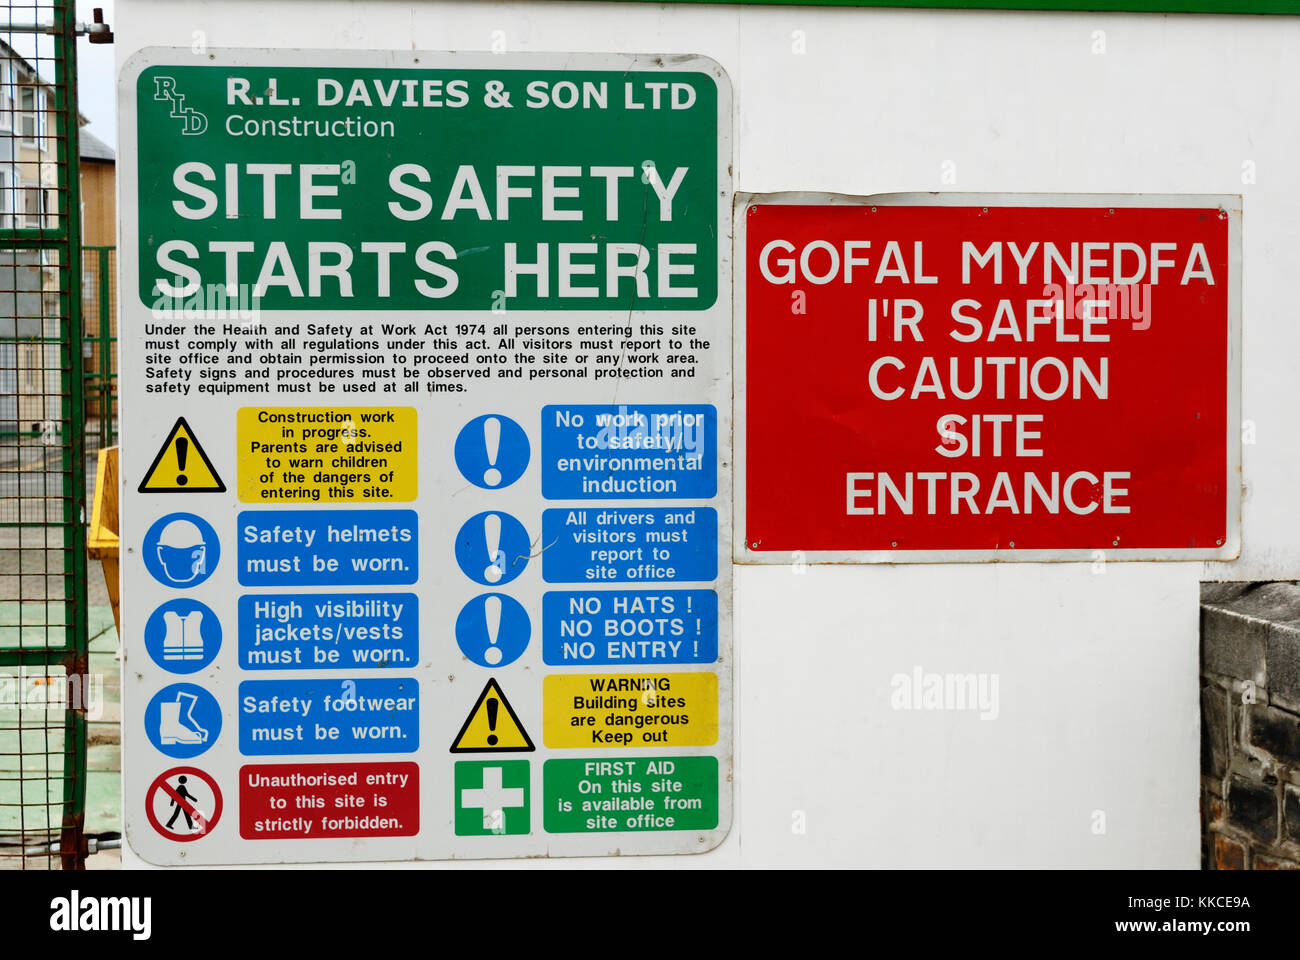 Site Safety signs at the entrance to a construction site, Wales. Stock Photo